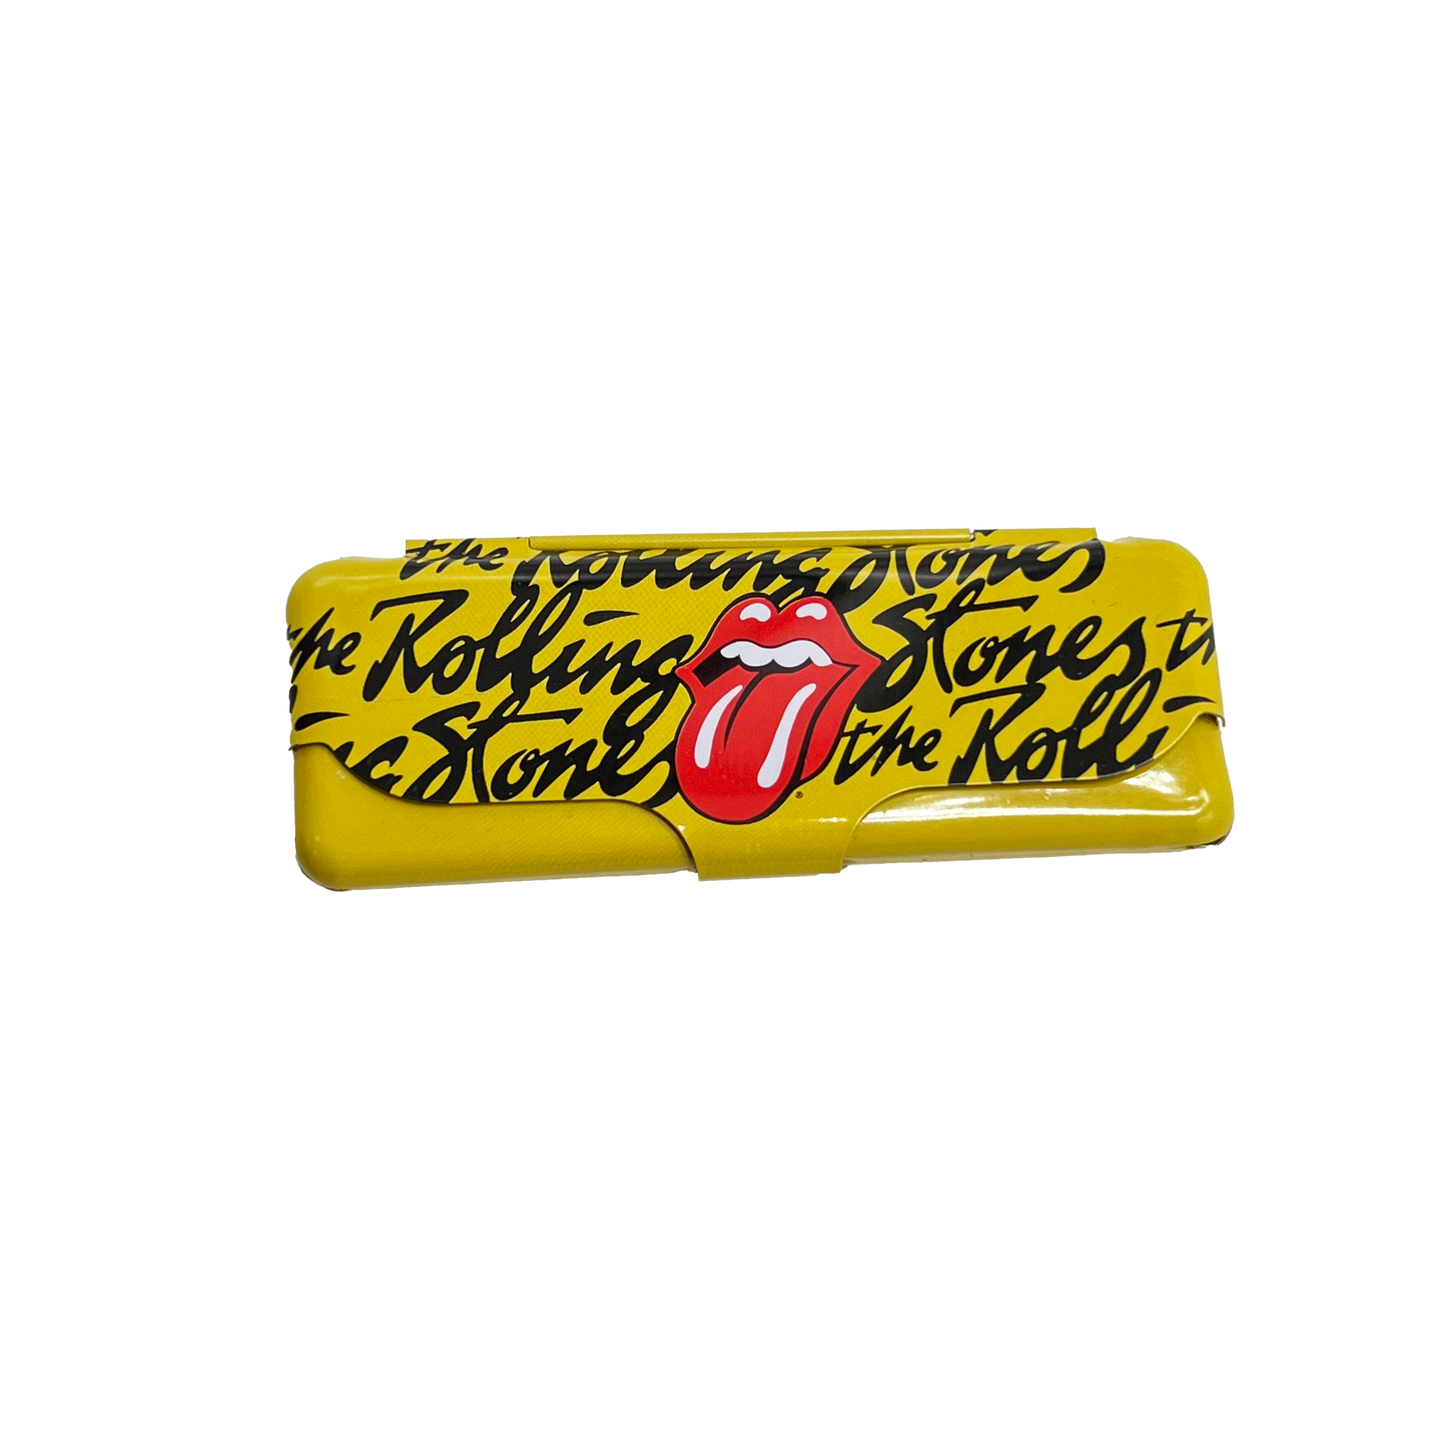 COVER PAPERS KING SIZE ROLLING STONES